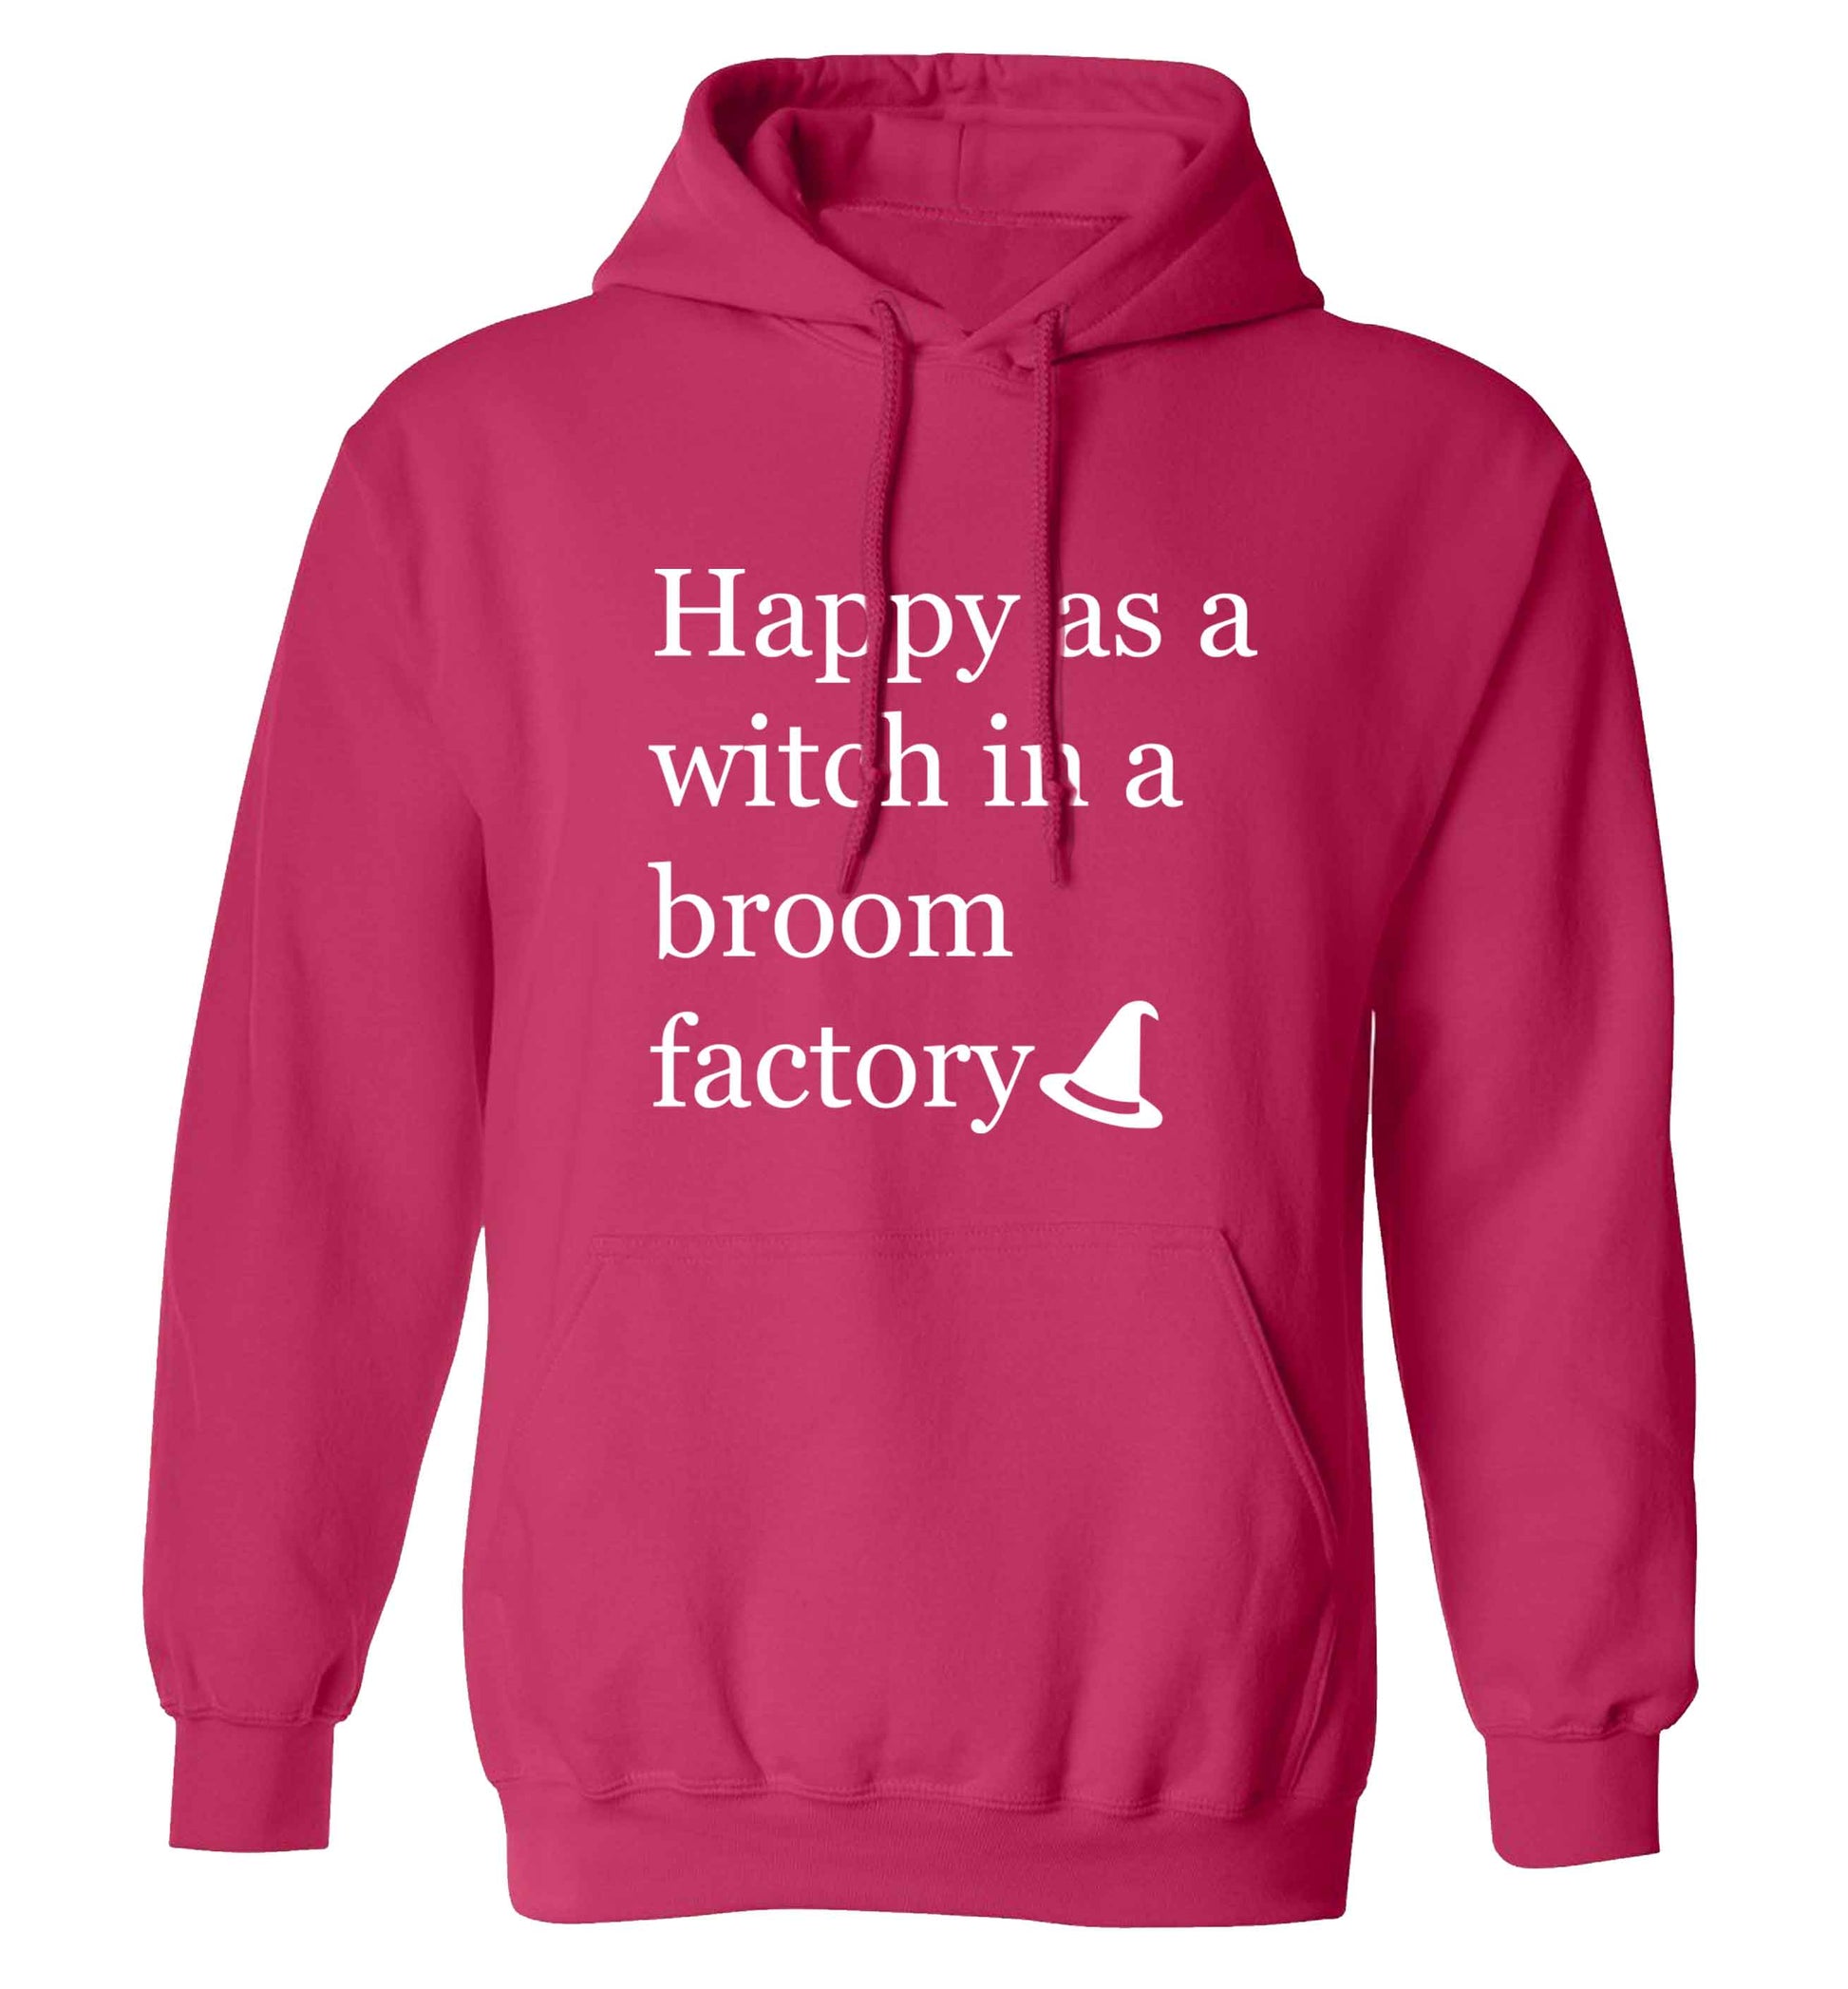 Happy as a witch in a broom factory adults unisex pink hoodie 2XL